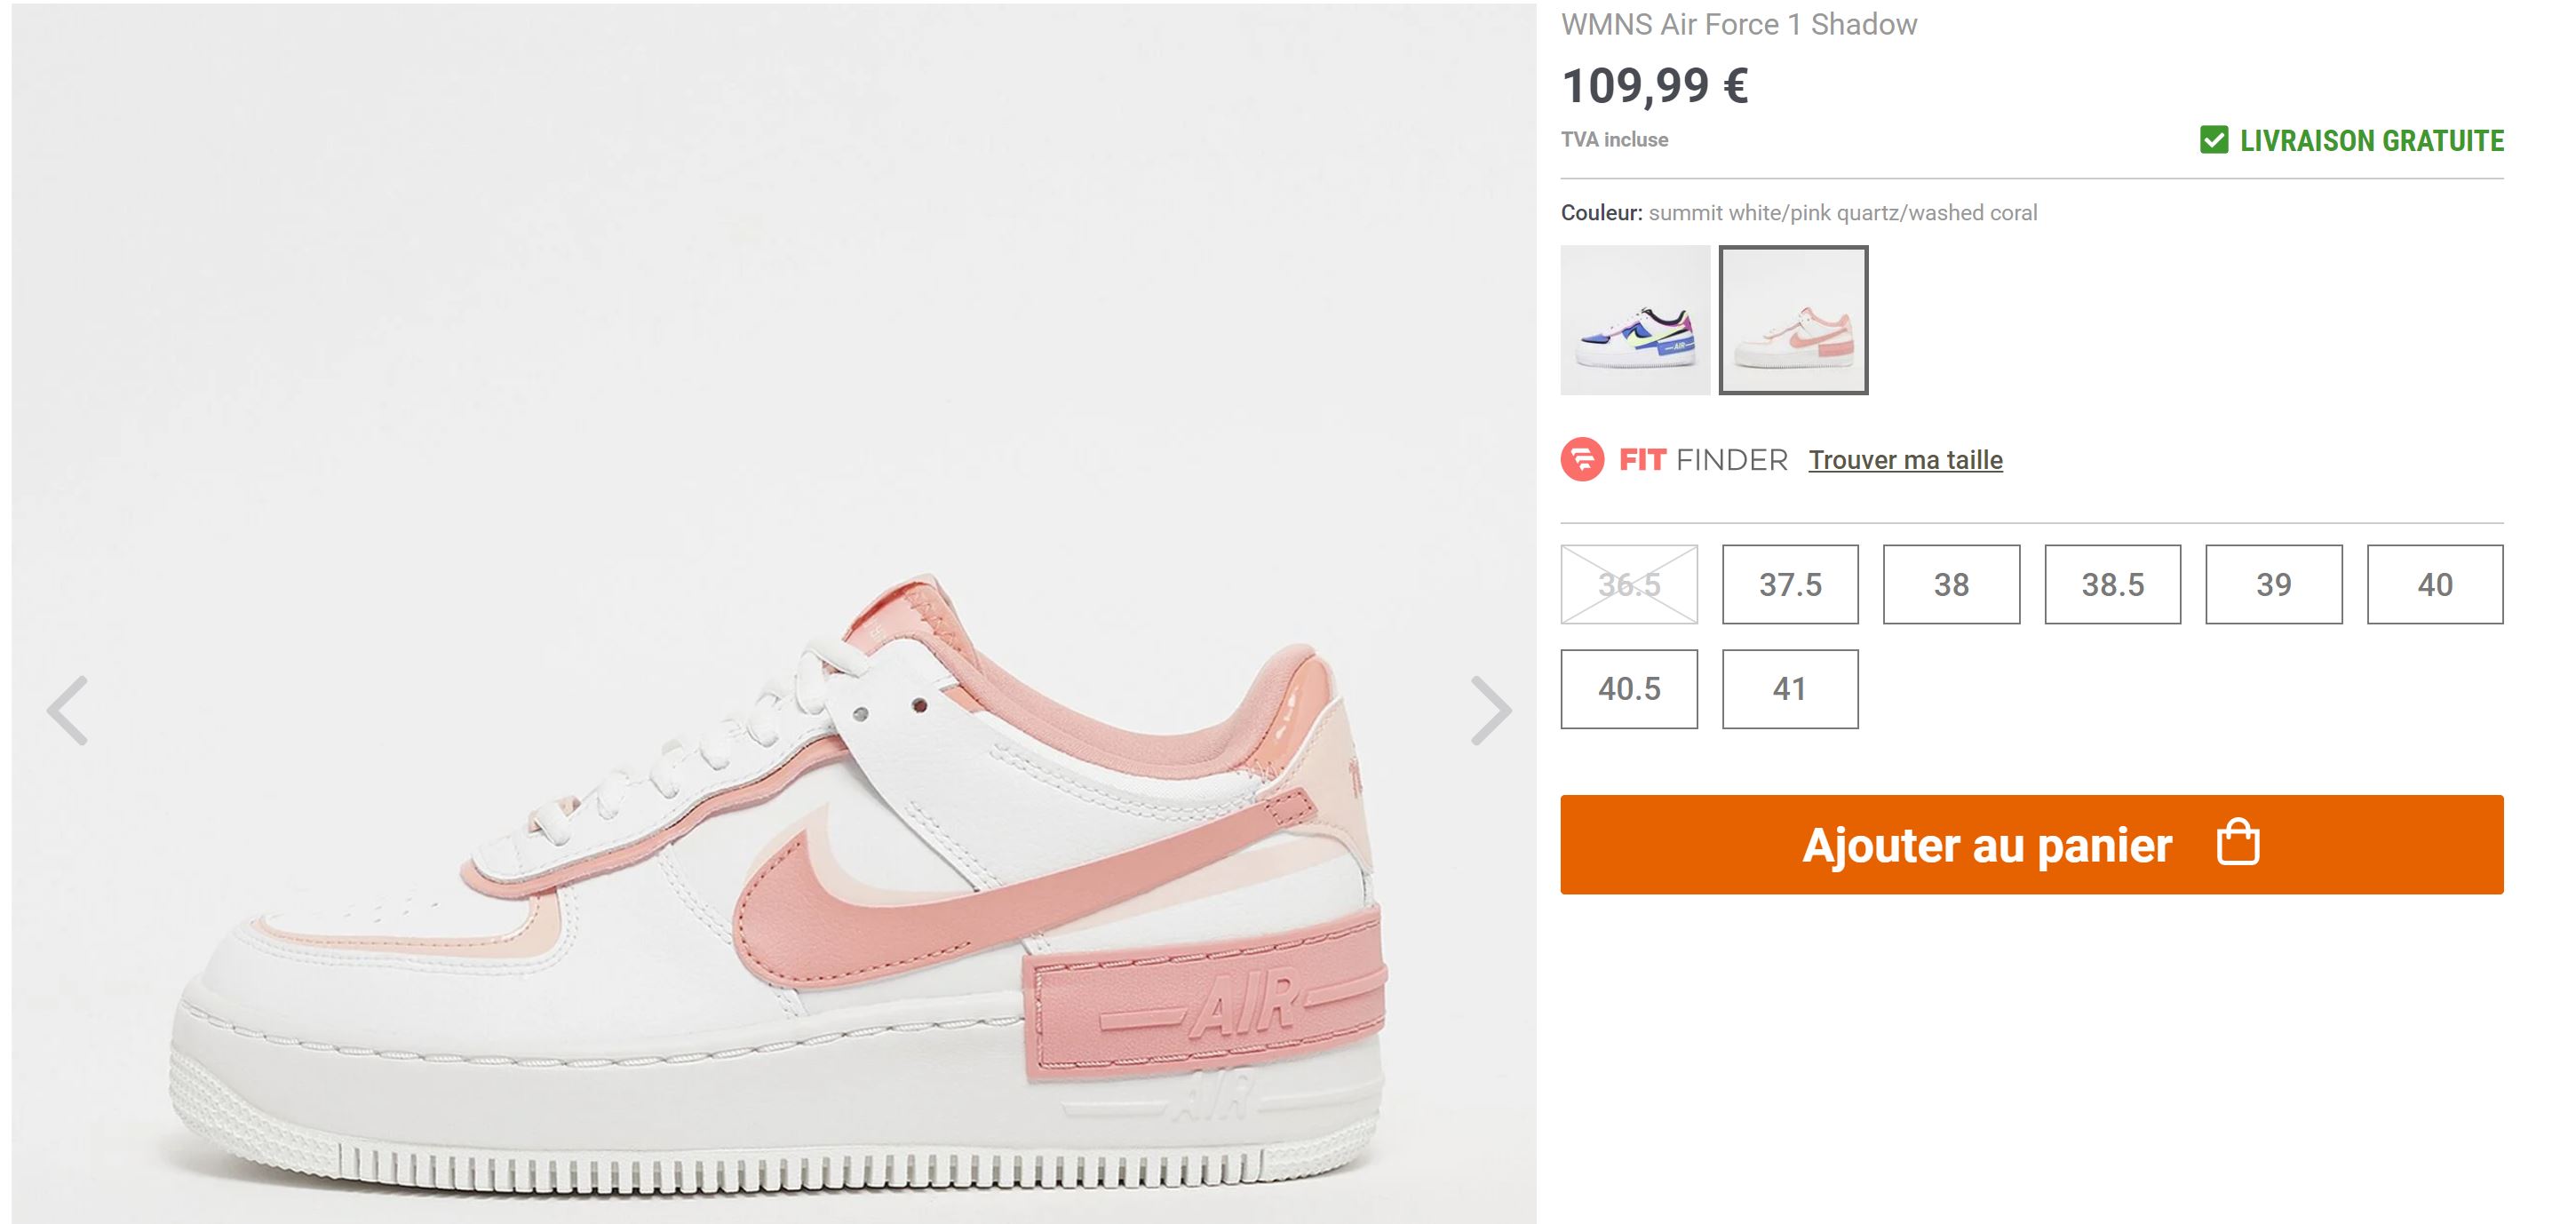 MoreSneakers.com on Twitter: "EU ONLY : Wmns Nike Air Force 1 Shadow  'Summit White/Pink Quartz/Washed Coral' again on Snipes EU  FR:https://t.co/VxRnycmqqZ DE:https://t.co/HqfcoERHob  NL:https://t.co/4CHnP4G3vE https://t.co/gjneG1cCLD" / Twitter